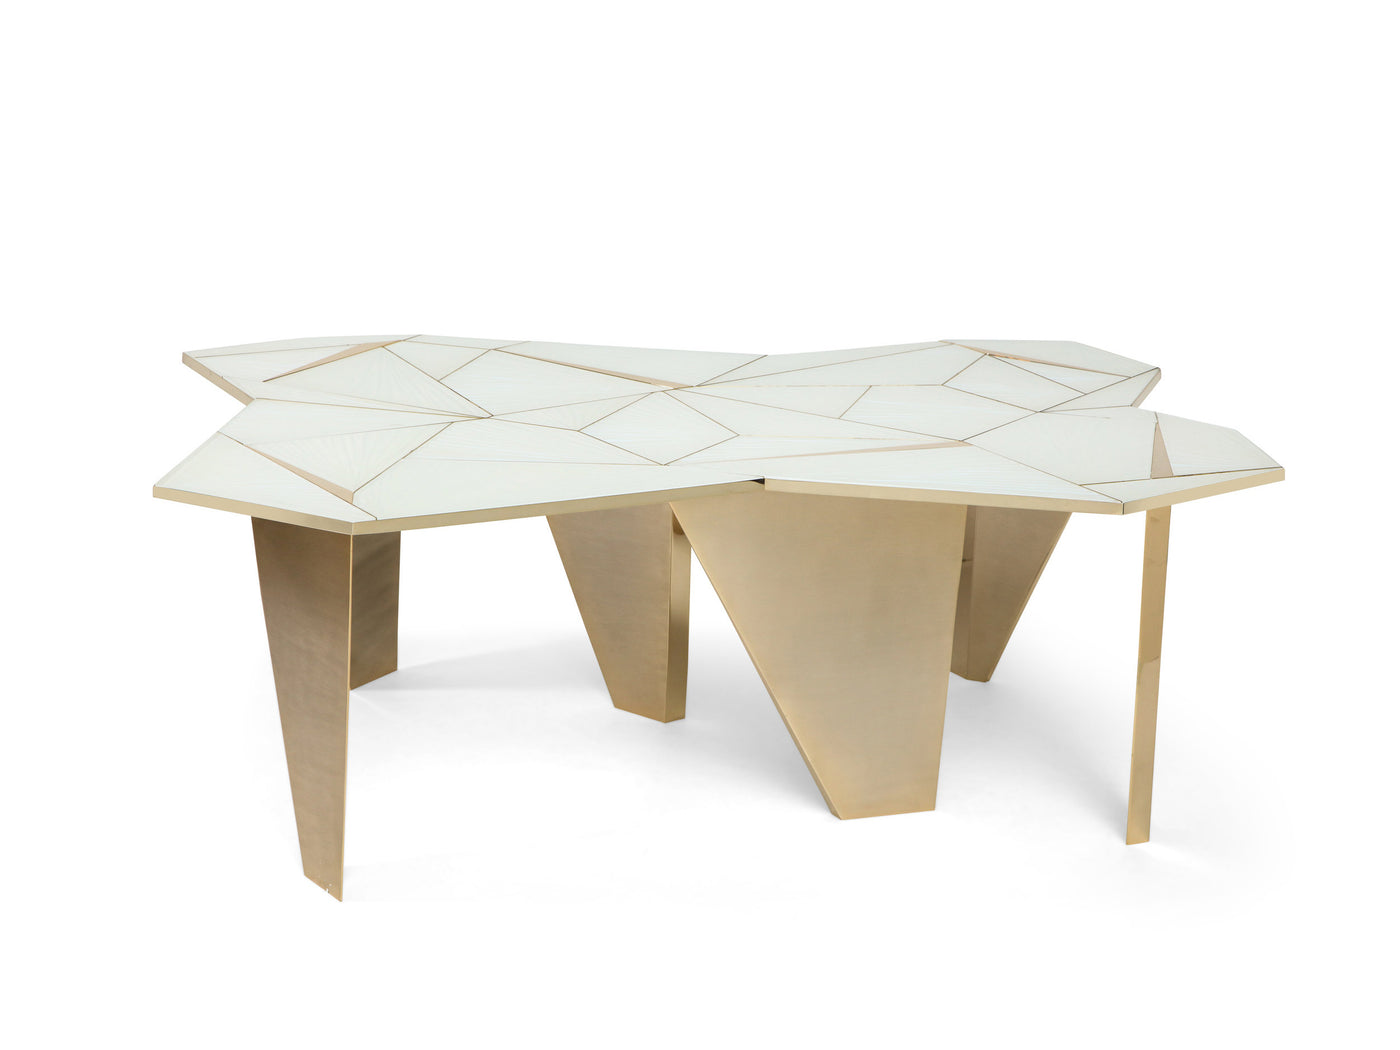 “Artide,” Low Table by Ghiró Studio